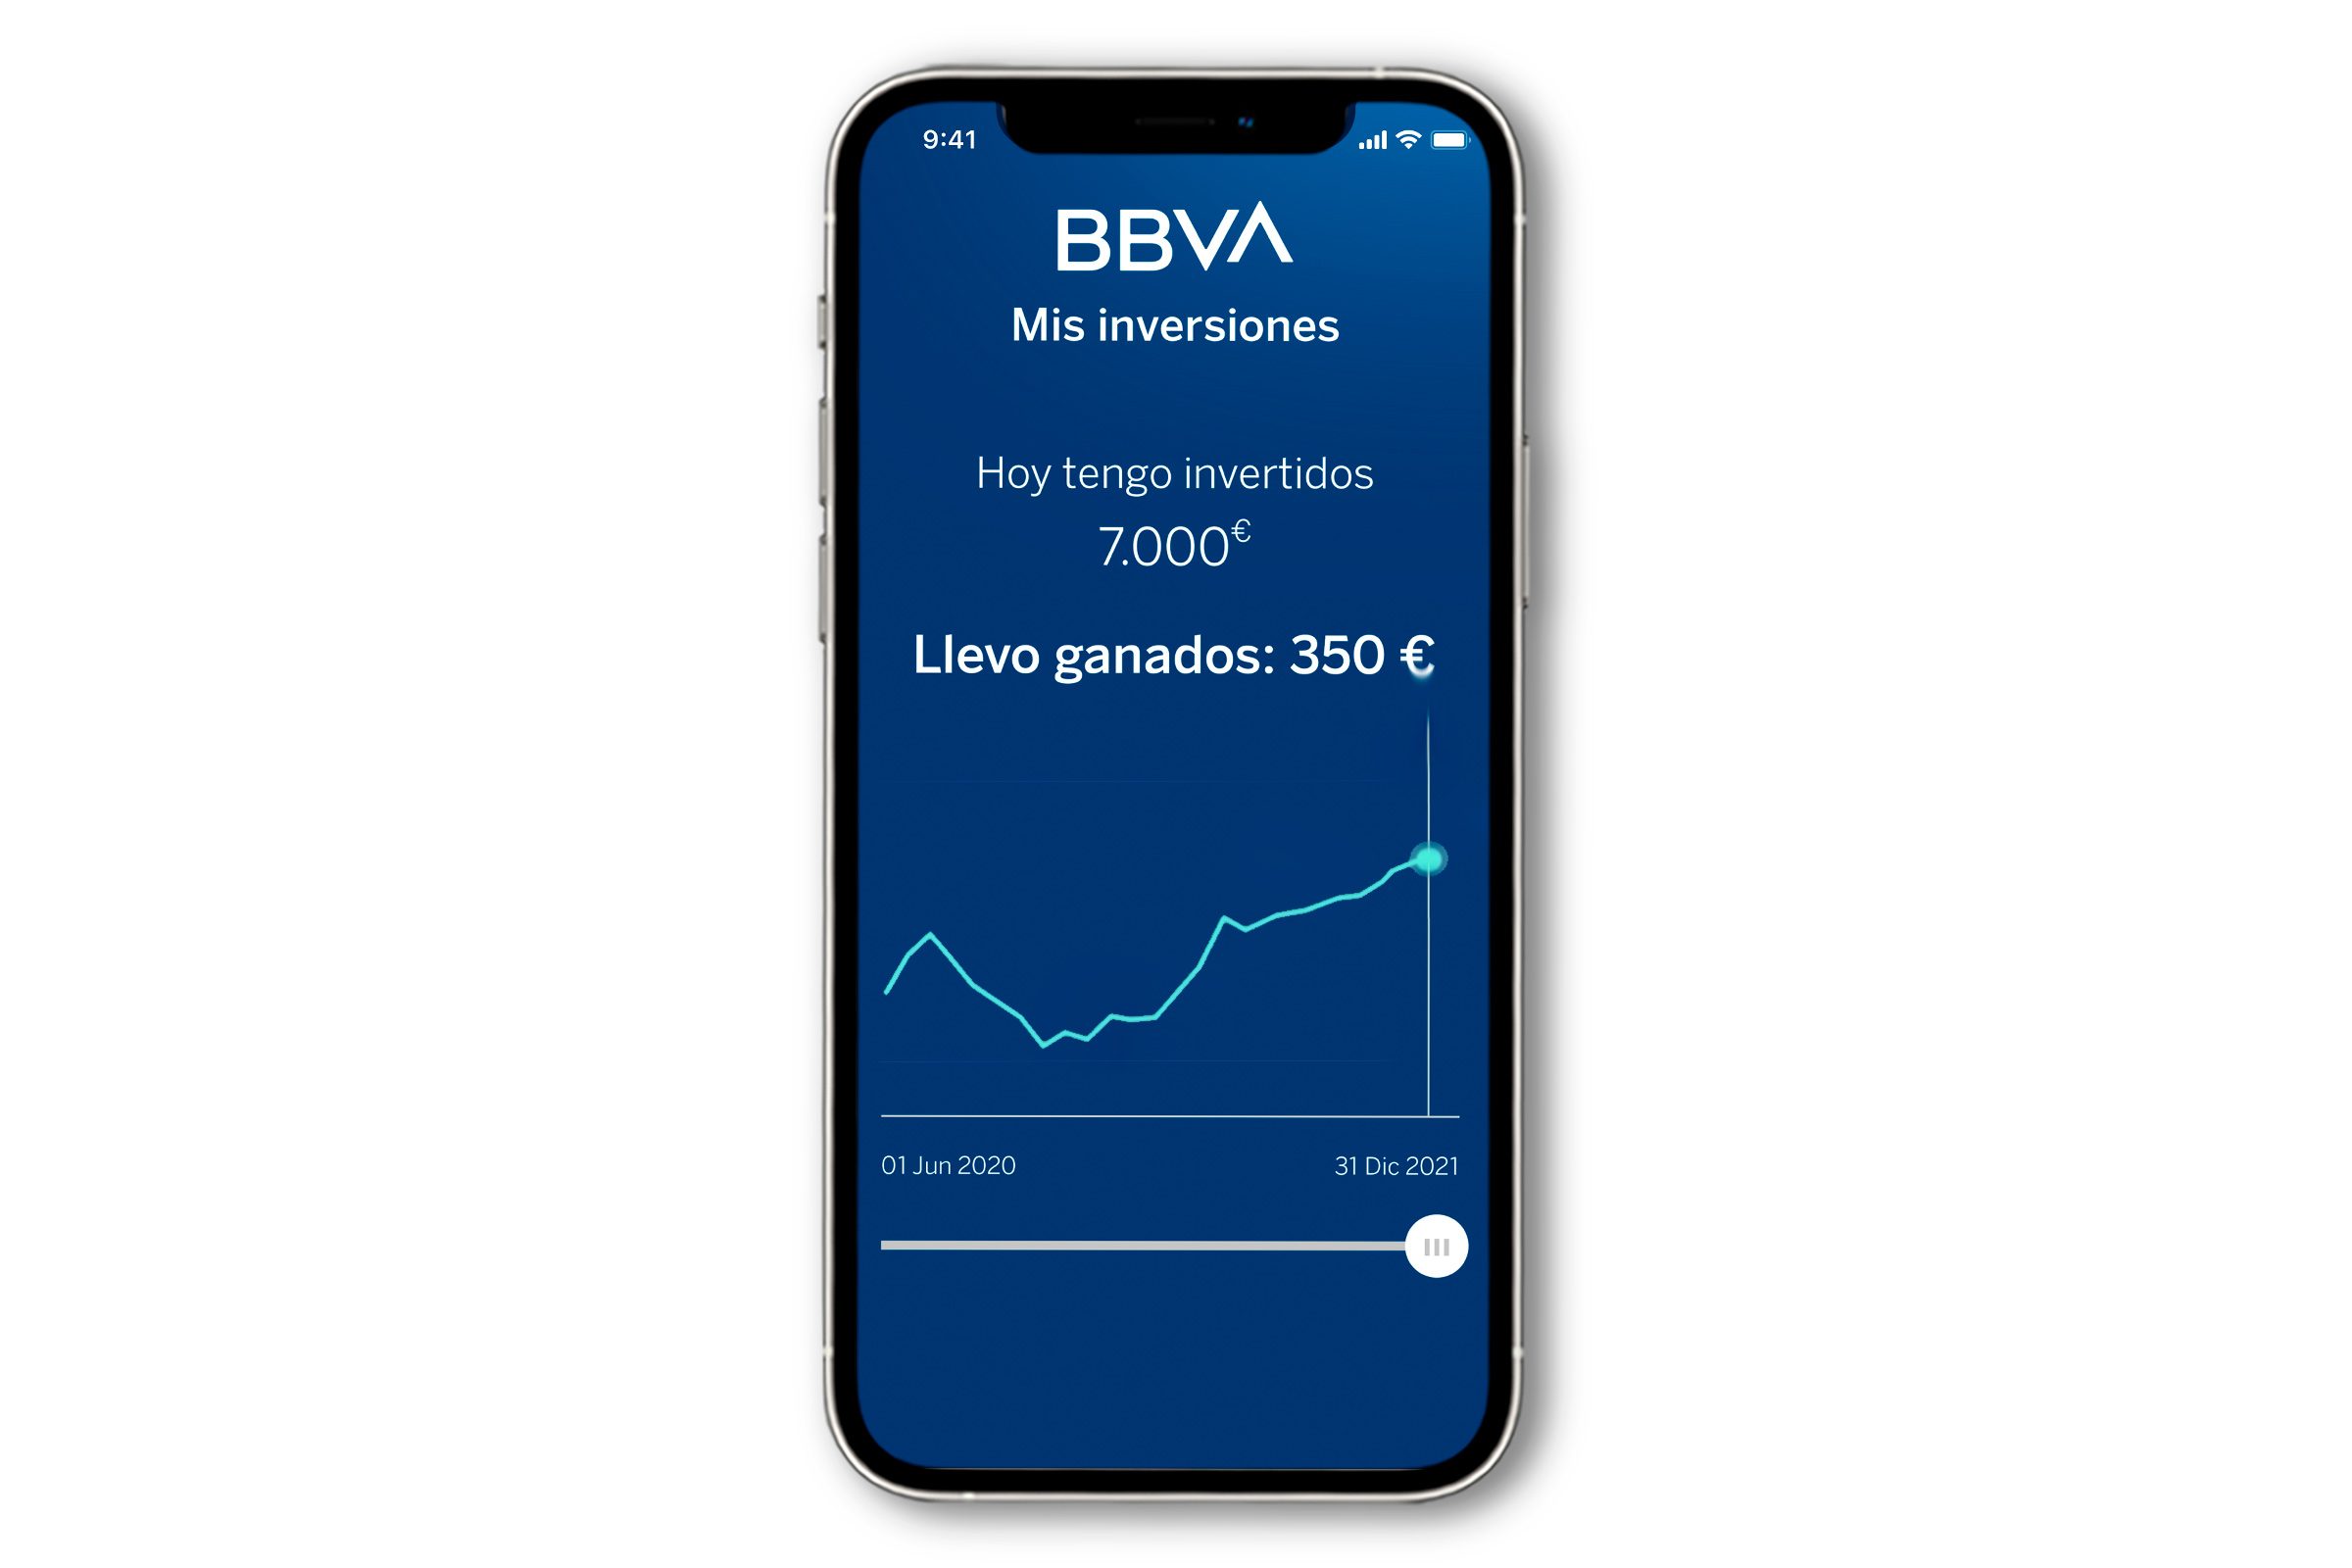 Image of My Investments in the BBVA app